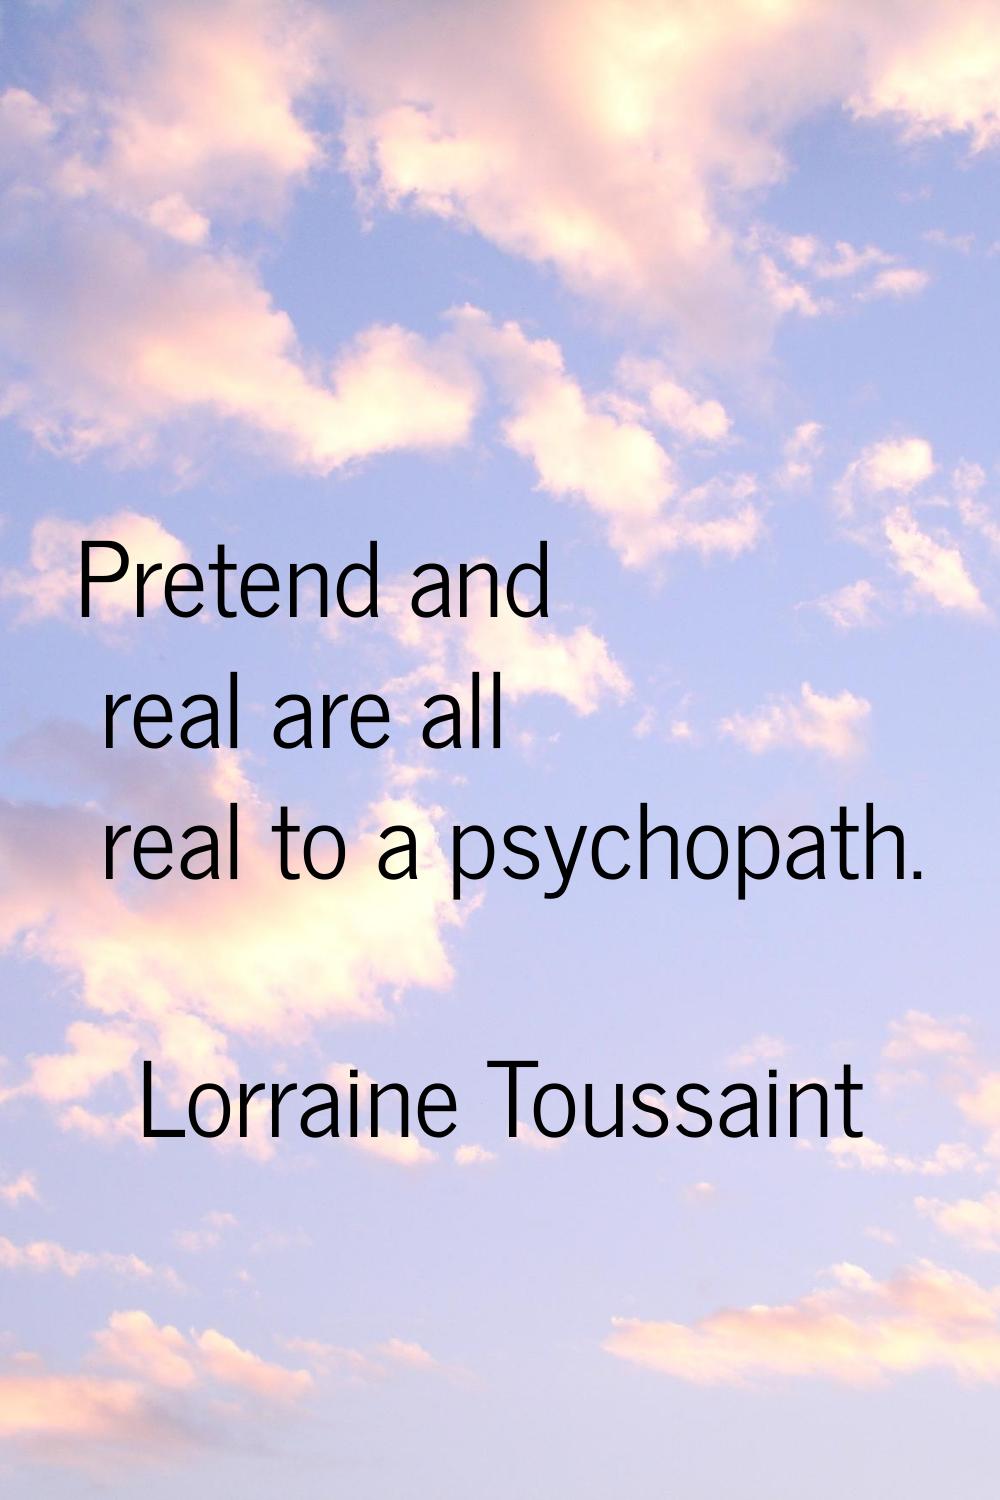 Pretend and real are all real to a psychopath.